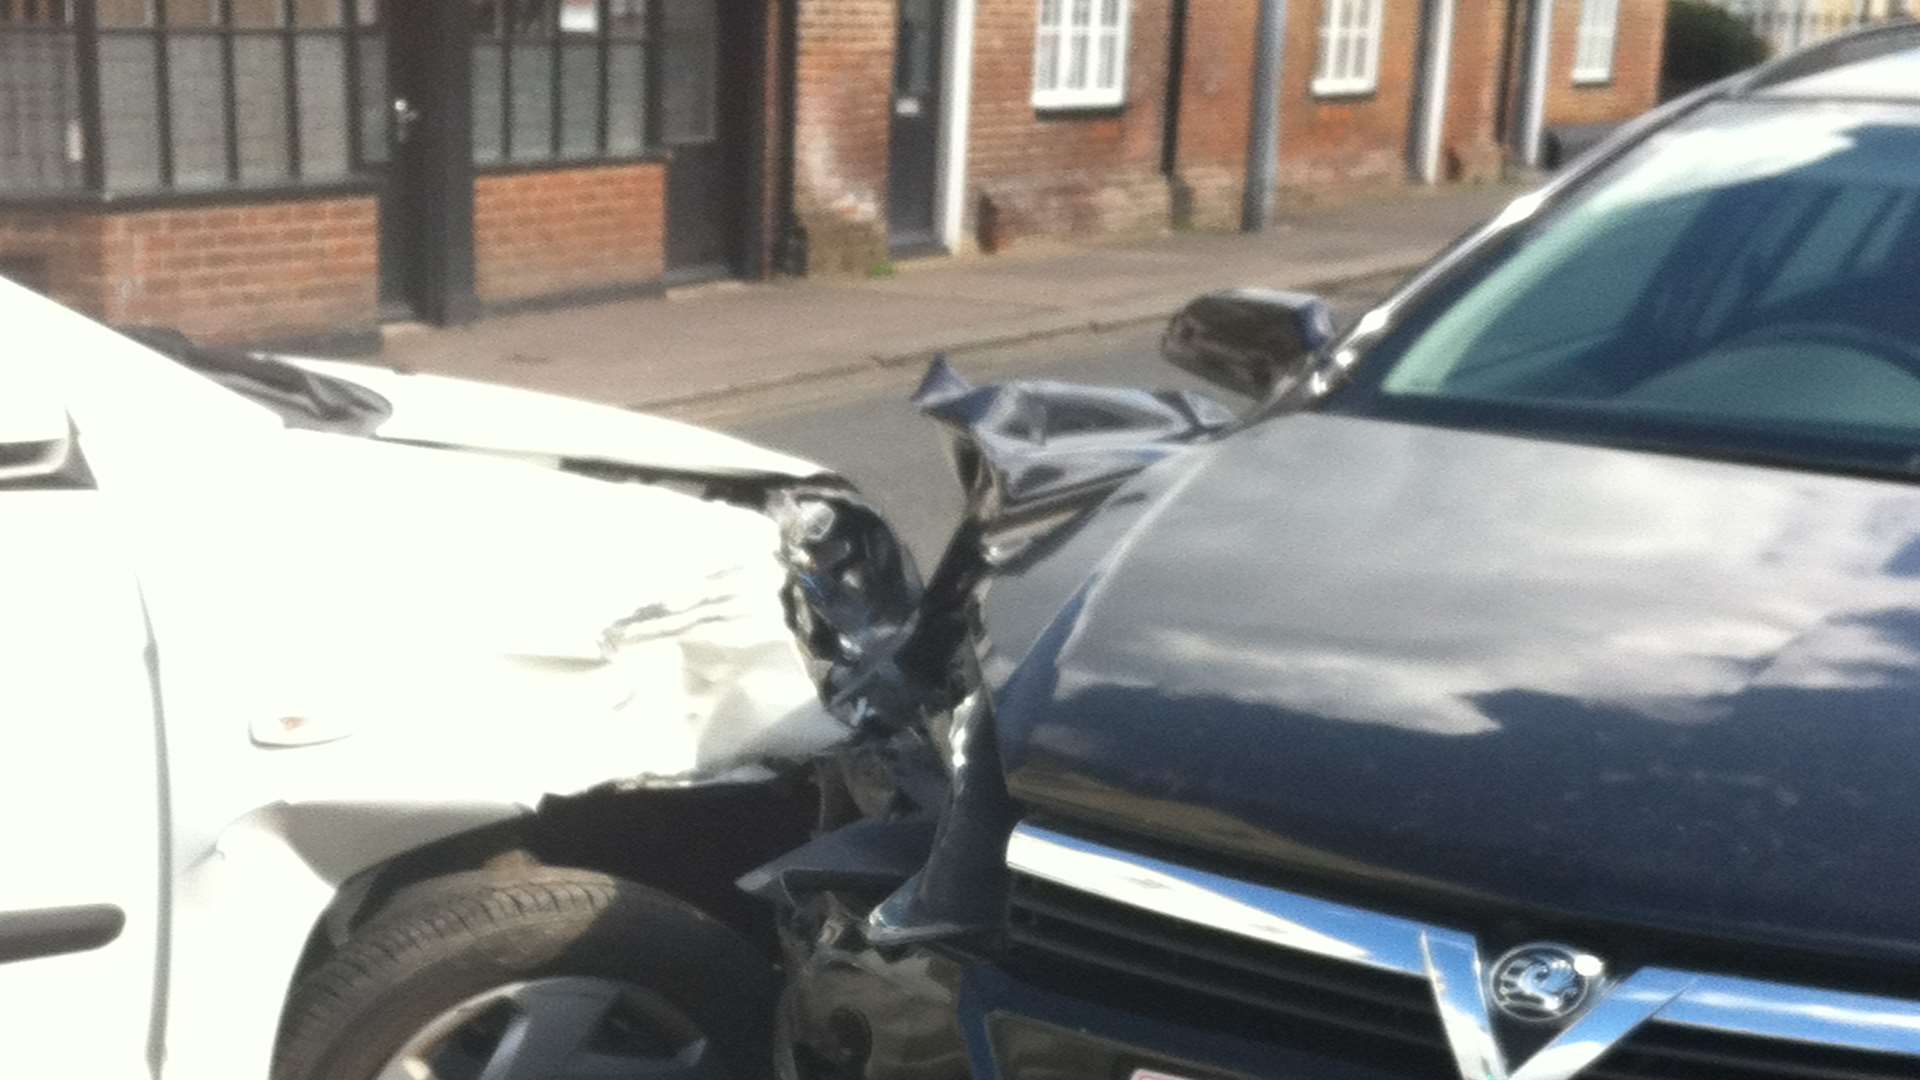 Two cars collide in East Street in Faversham